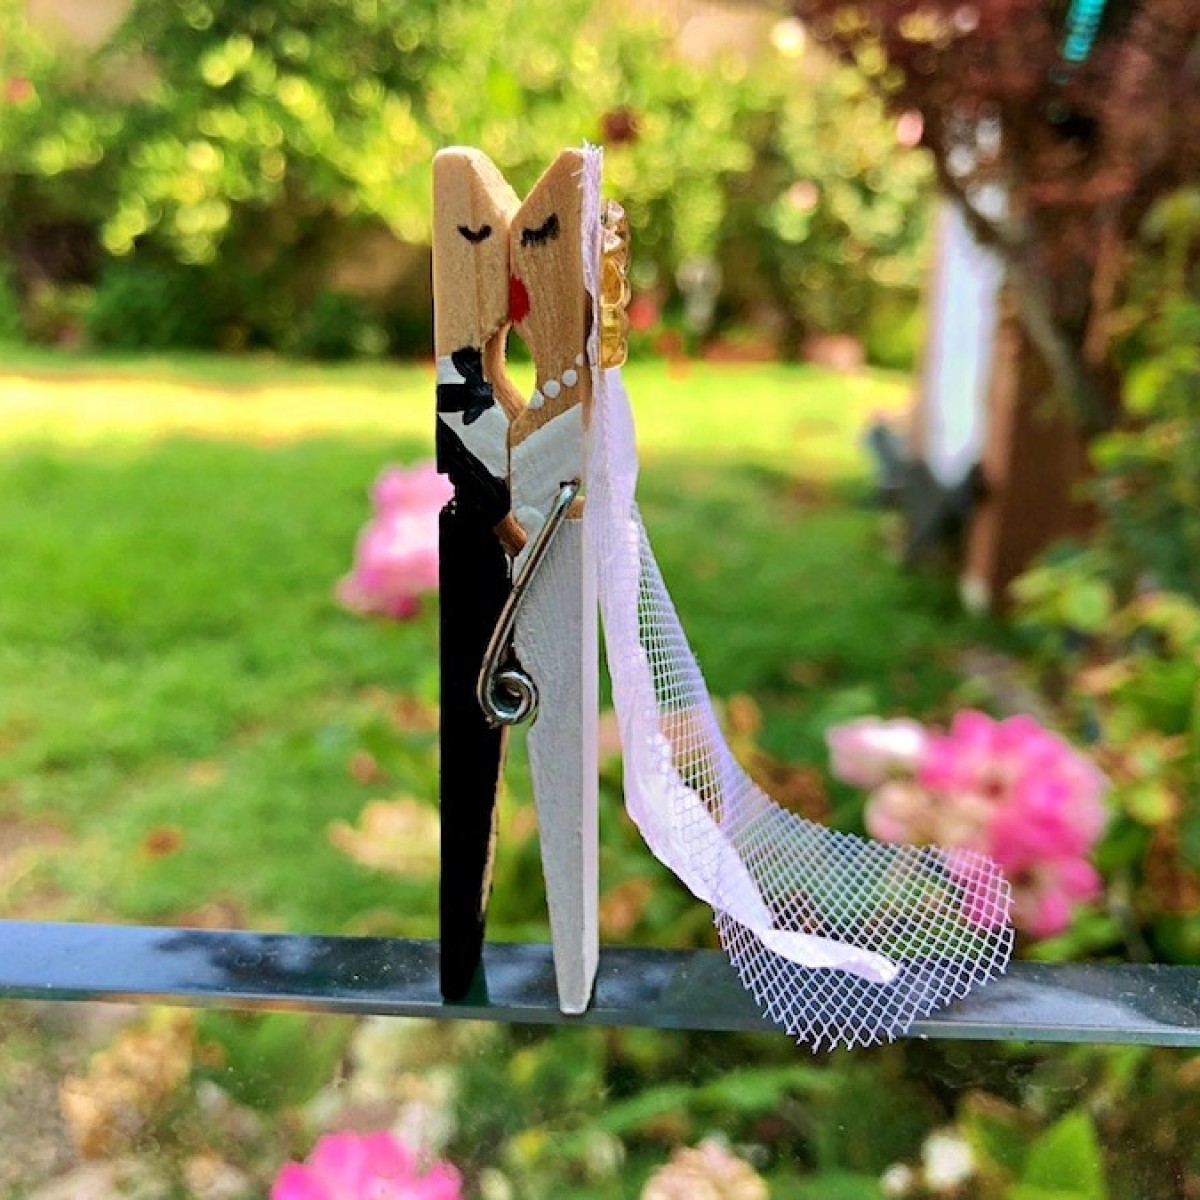 Making a Bride and Groom Clothespin Decor | My Frugal Wedding